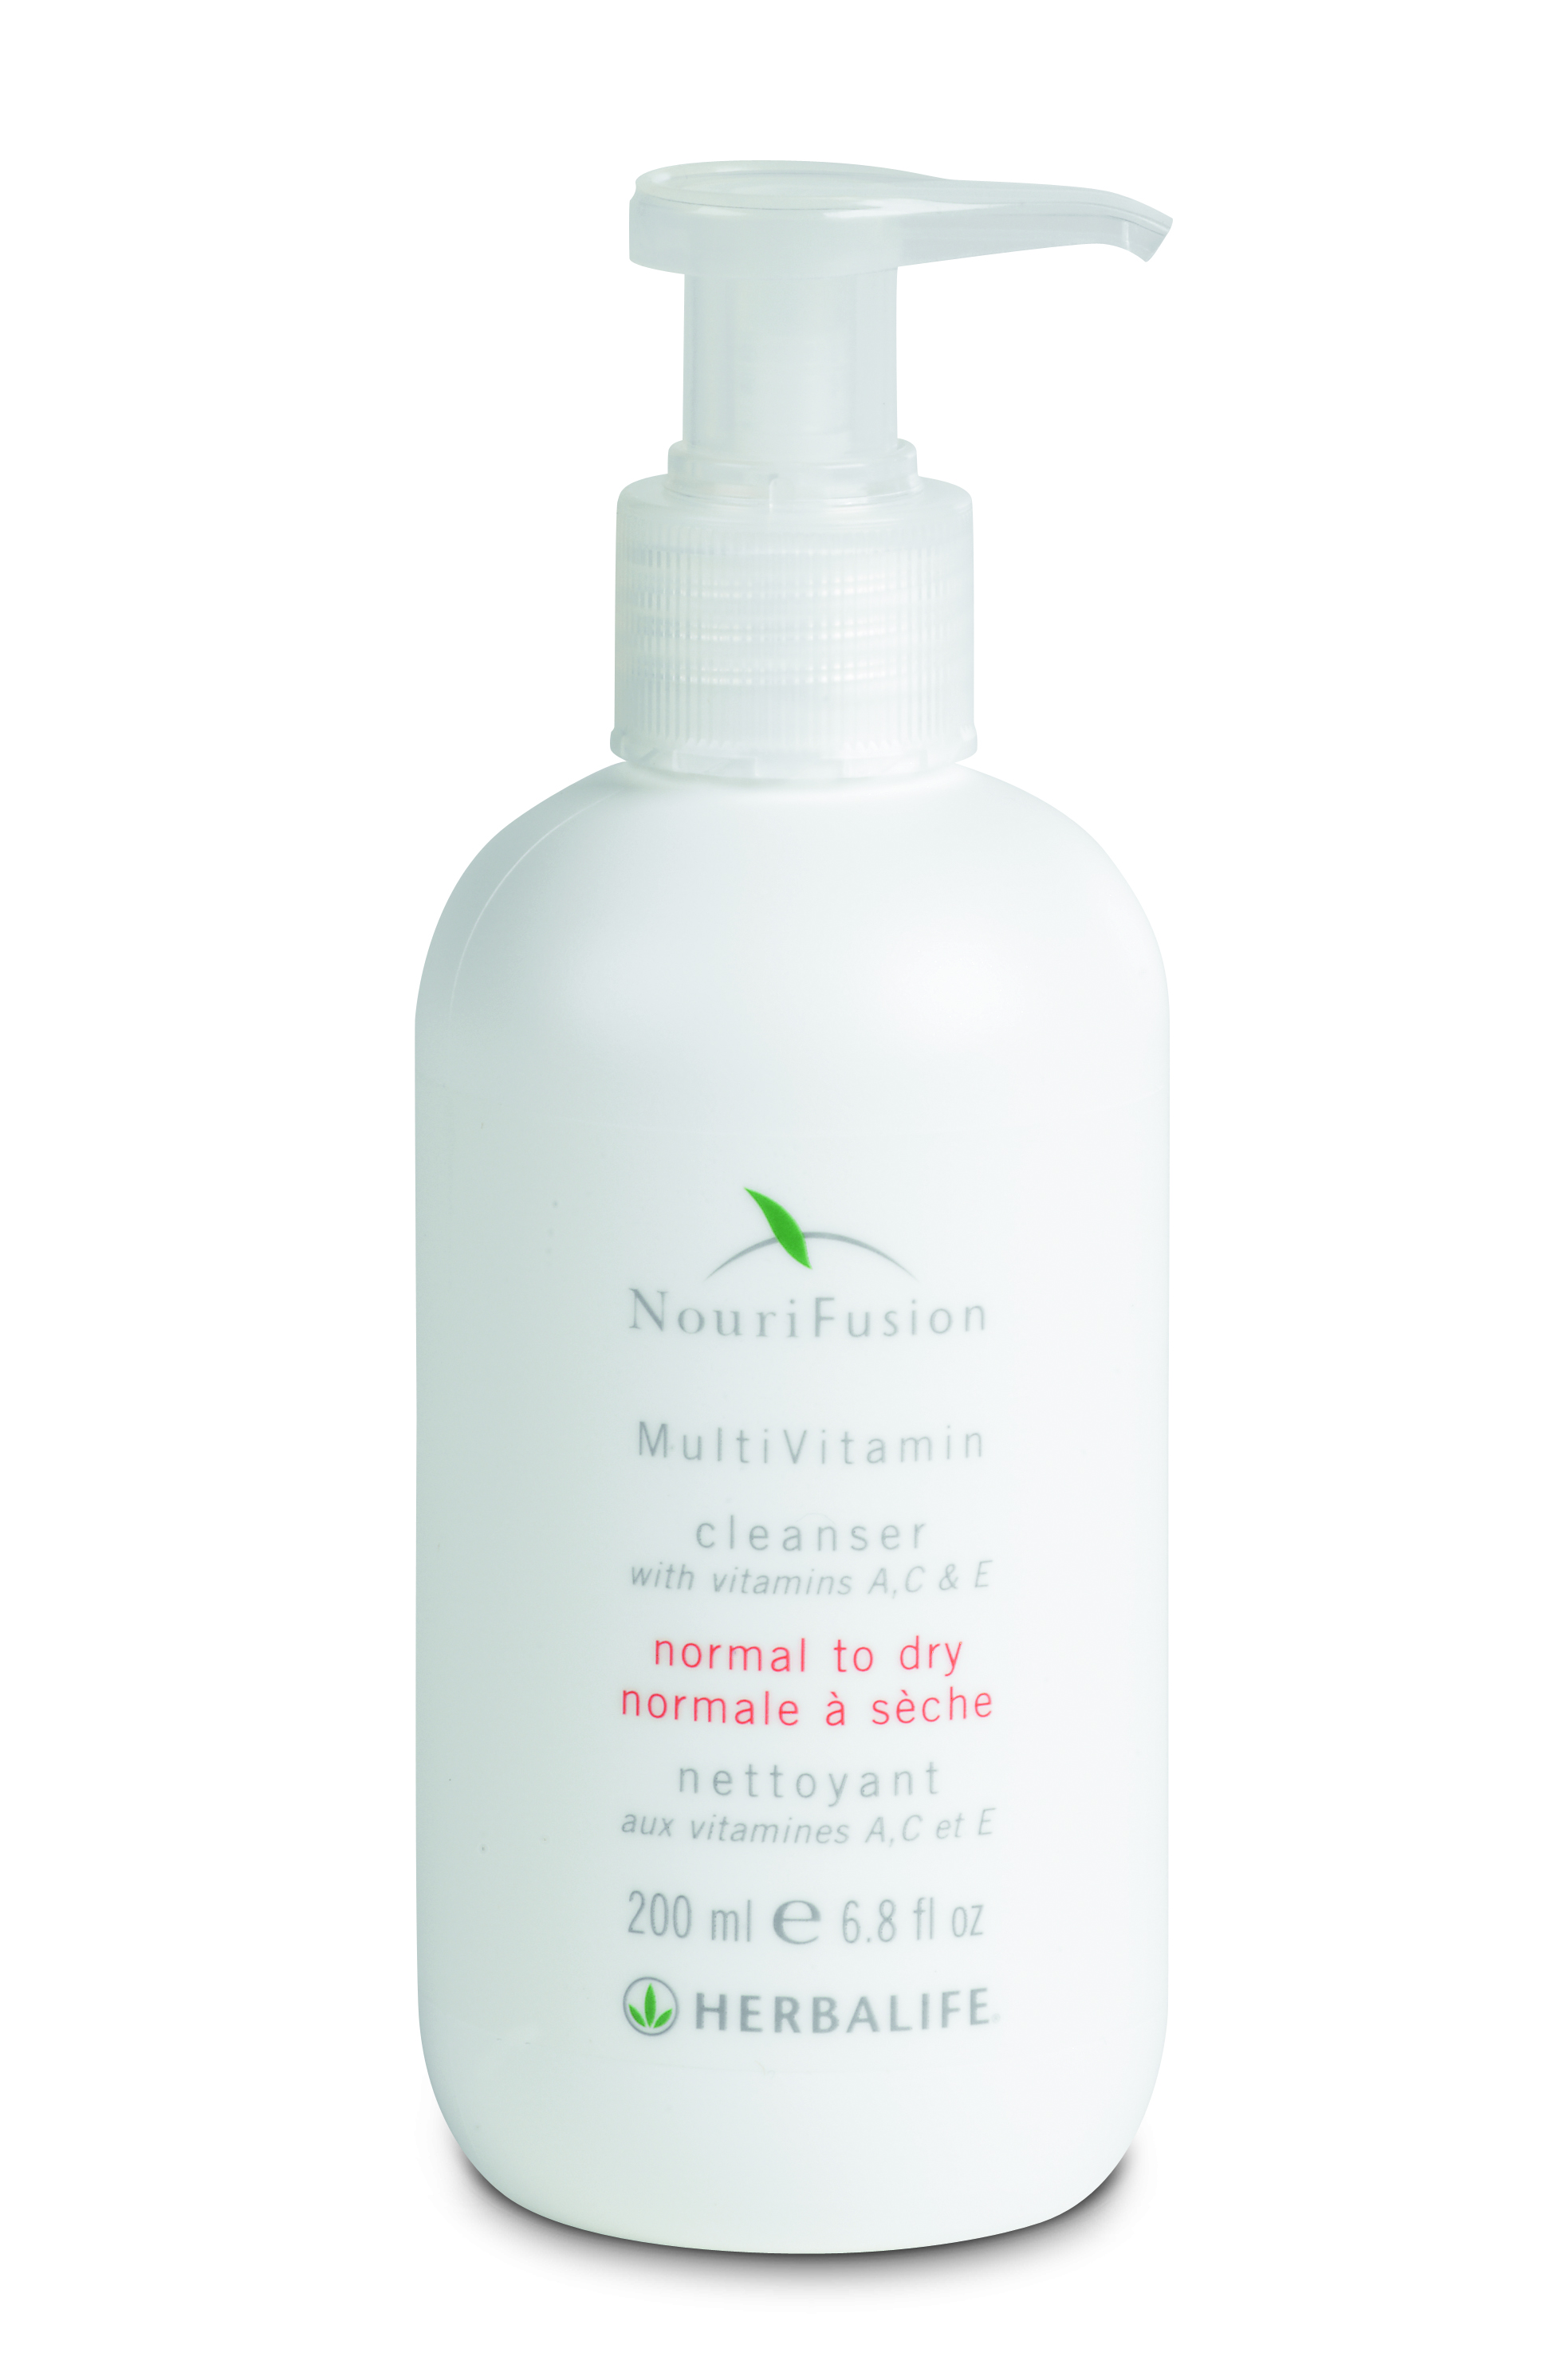 NouriFusion Cleanser